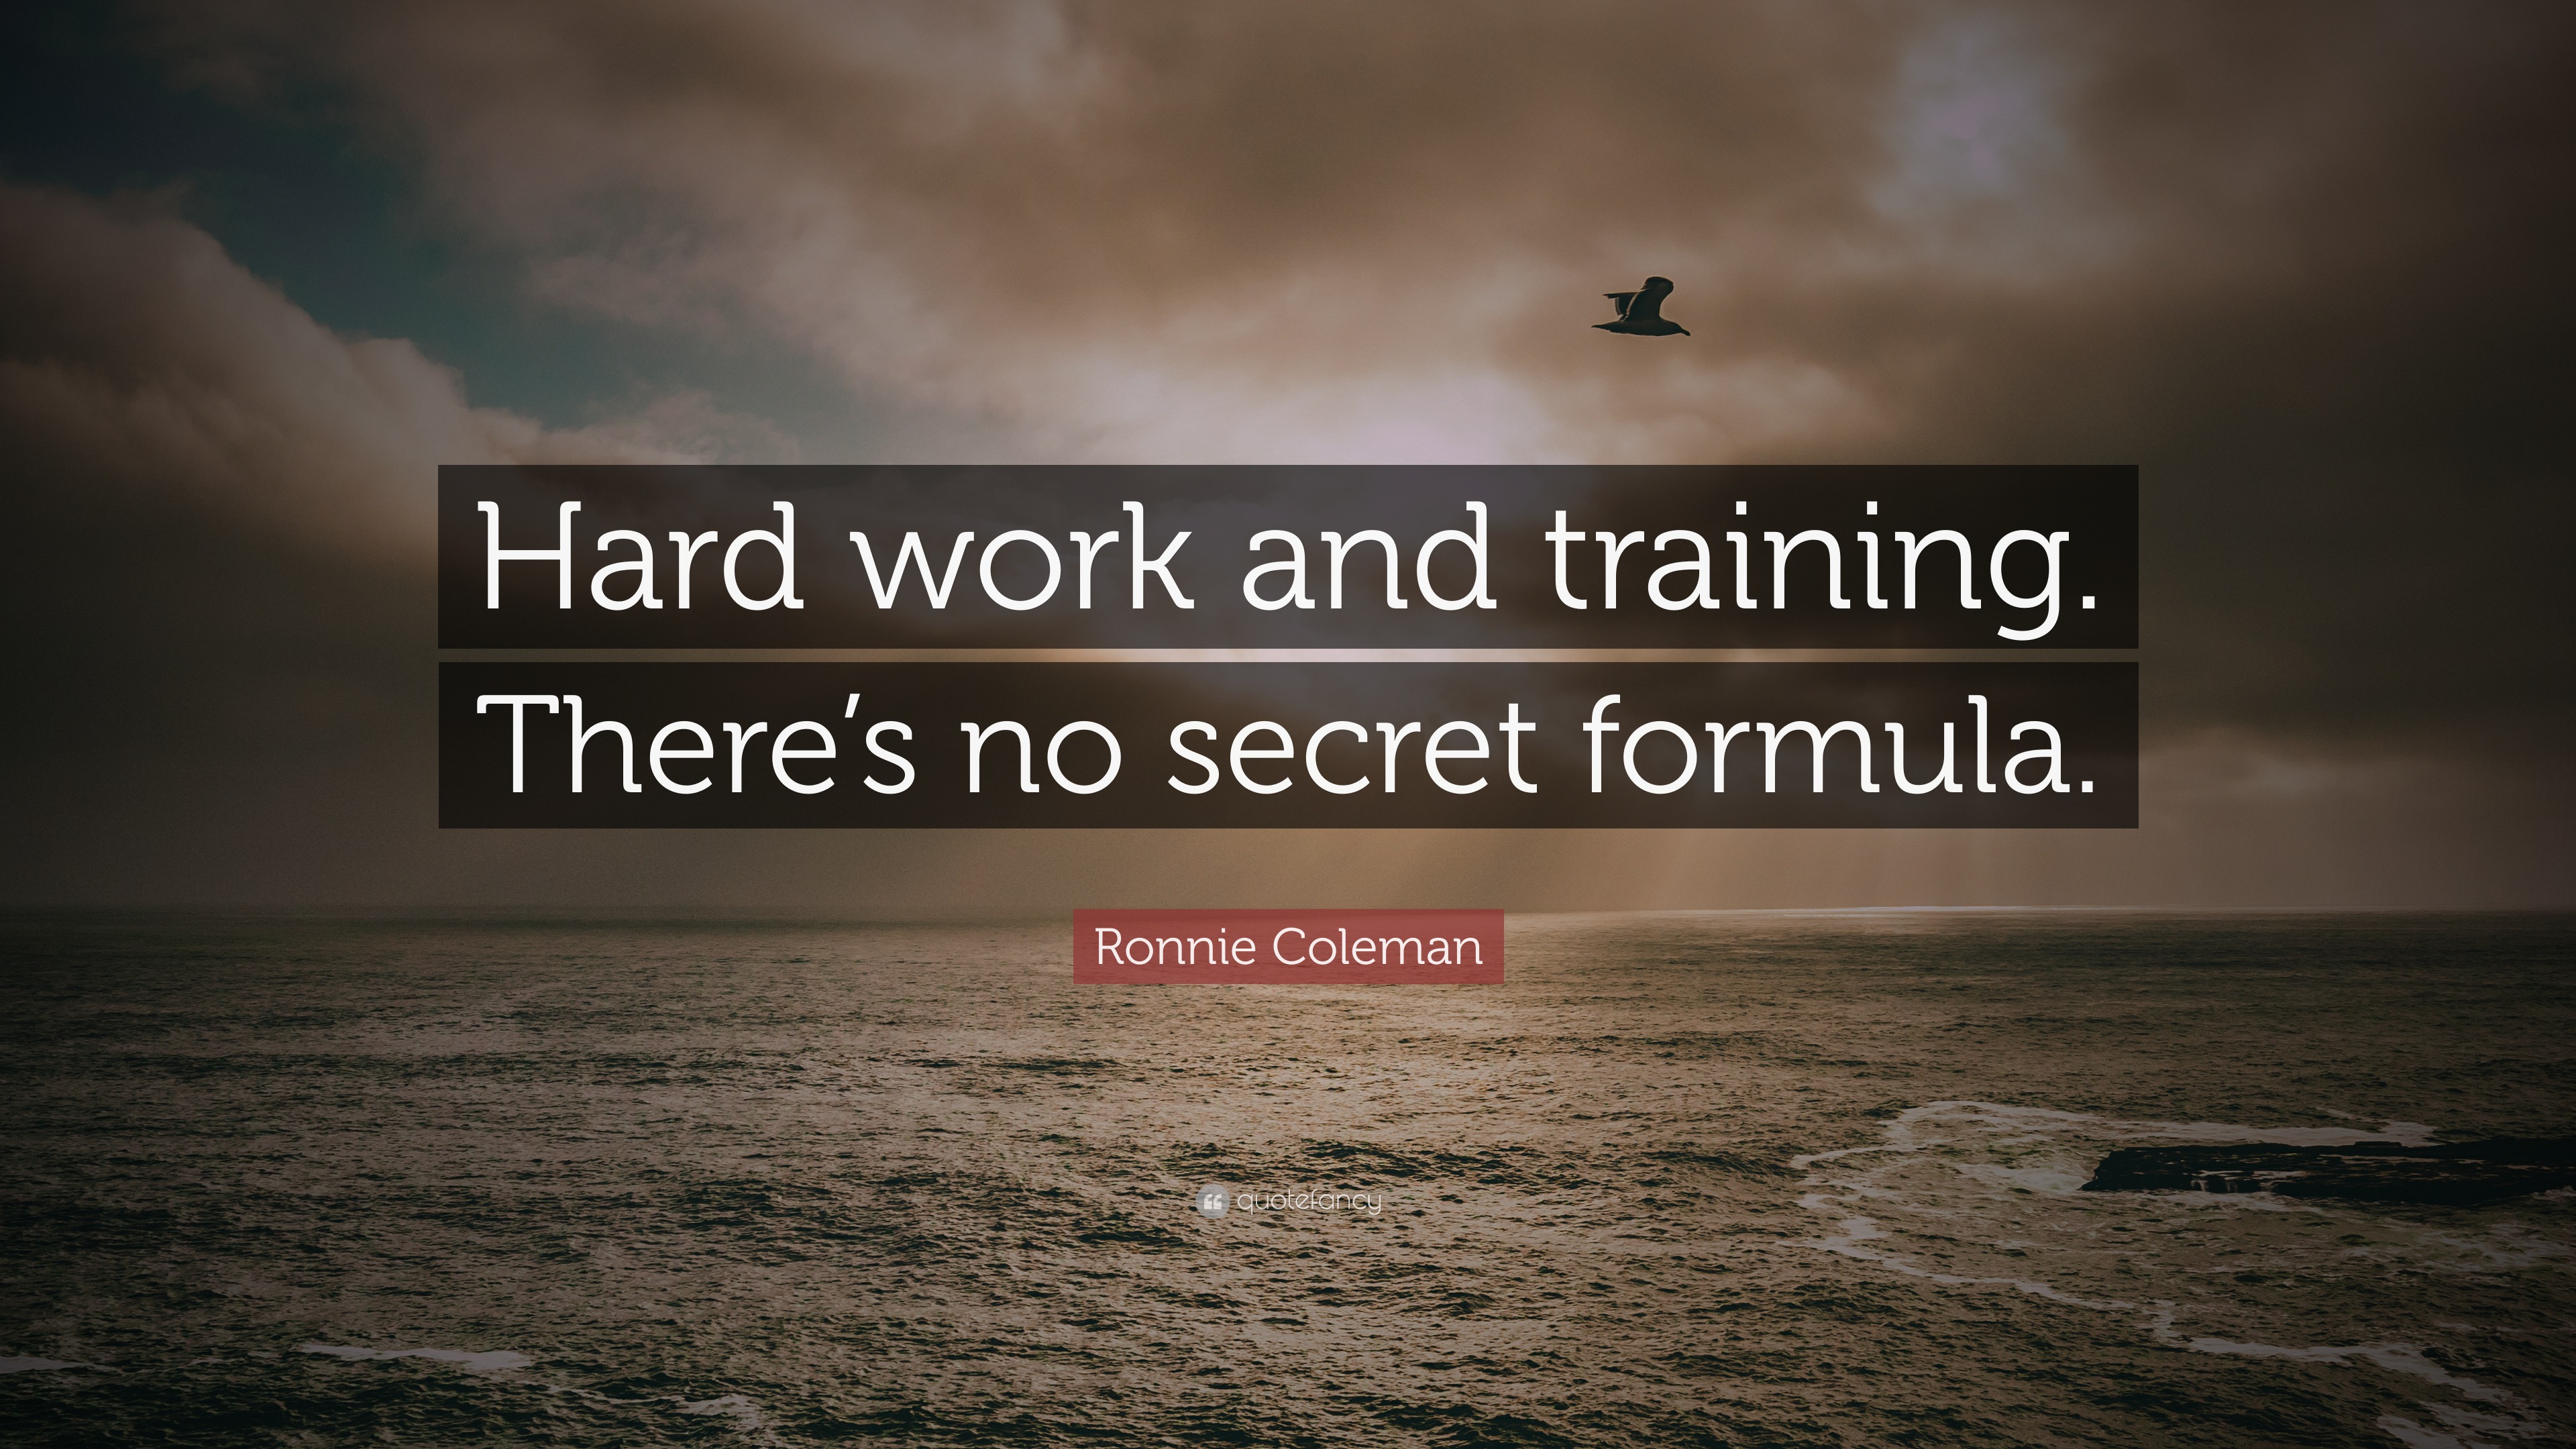 Ronnie Coleman Quote “Hard work and training. There’s no